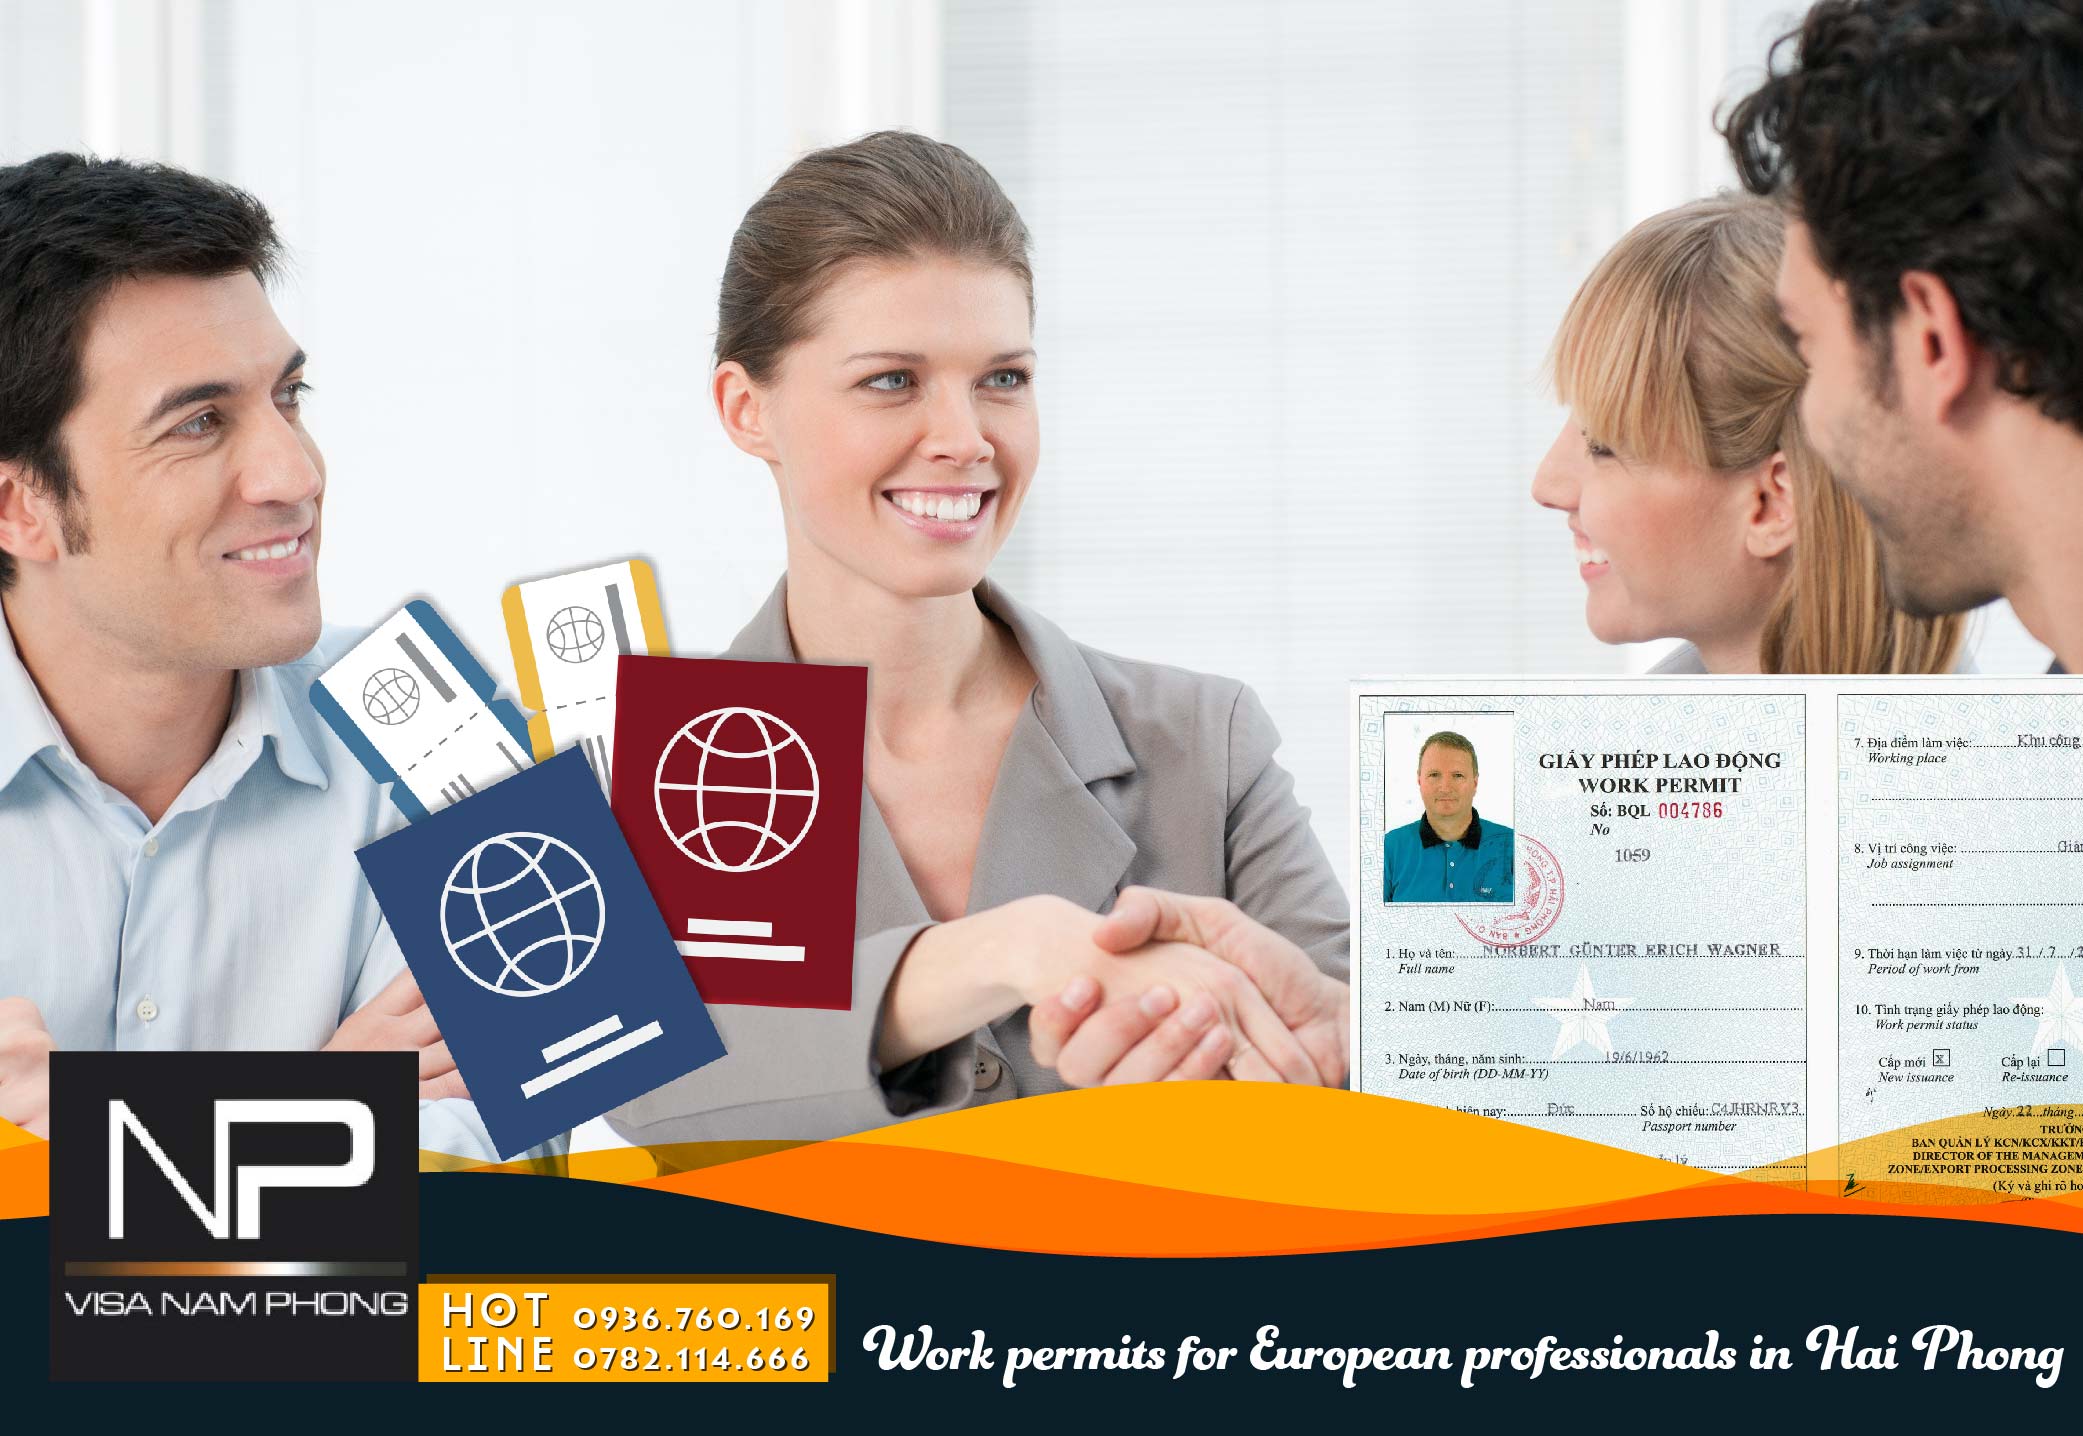 Work permits for European professionals in Hai Phong